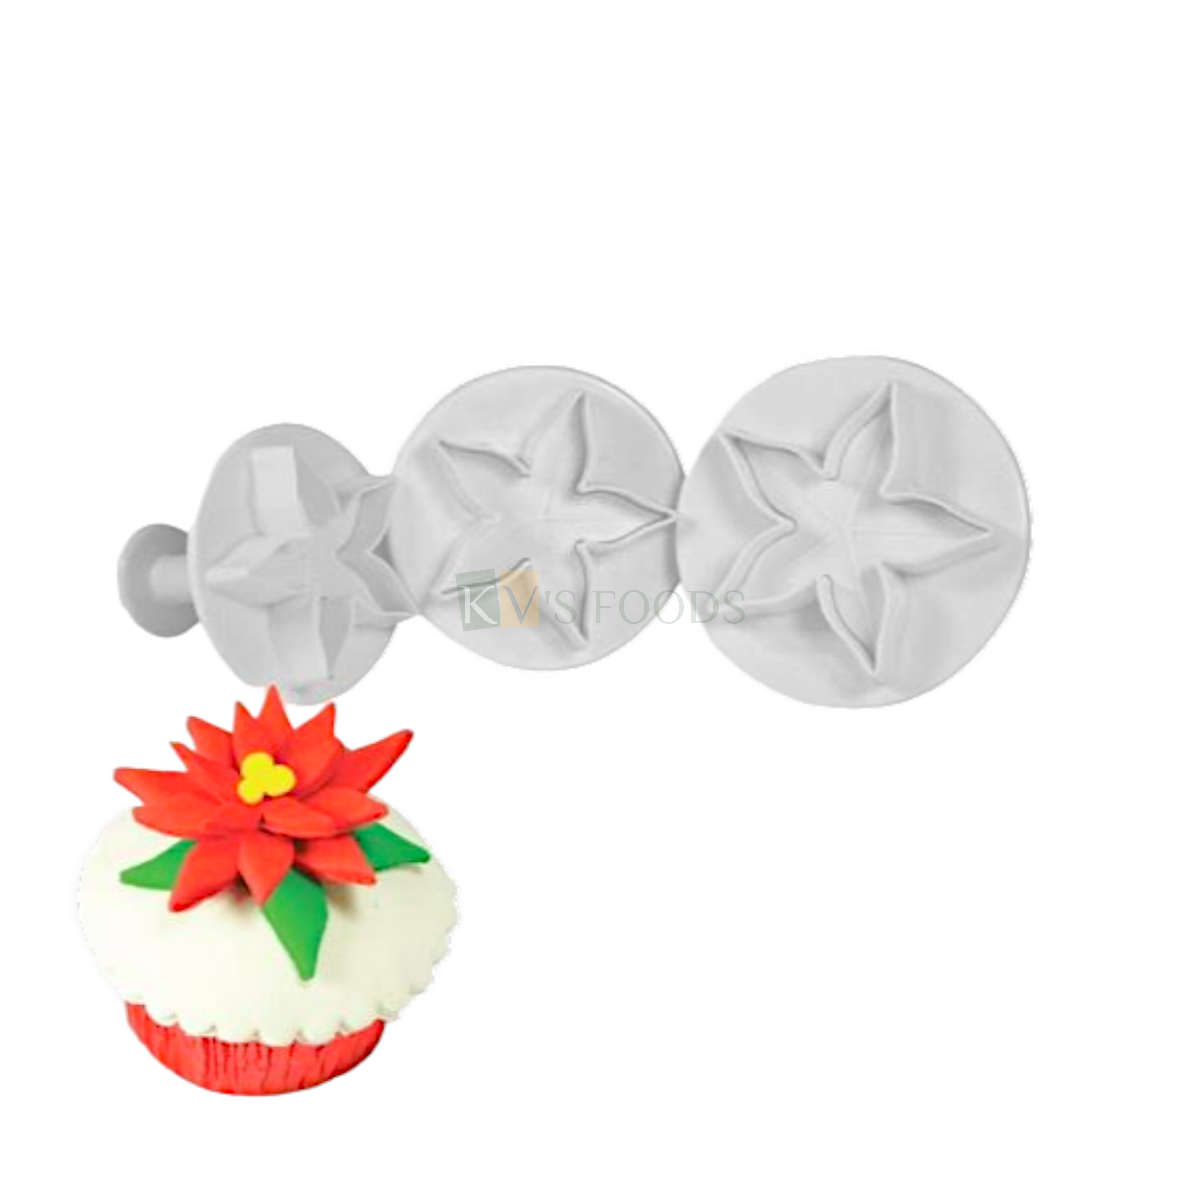 3 PCS White Calyx Flower Fondant Plunger Cutters Stamps, Molds, Embossing Spring Mold Printed Presses Impression, Biscuits, Chocolates Pancake Cookies Wedding Anniversary Cakes Cupcake Decorations